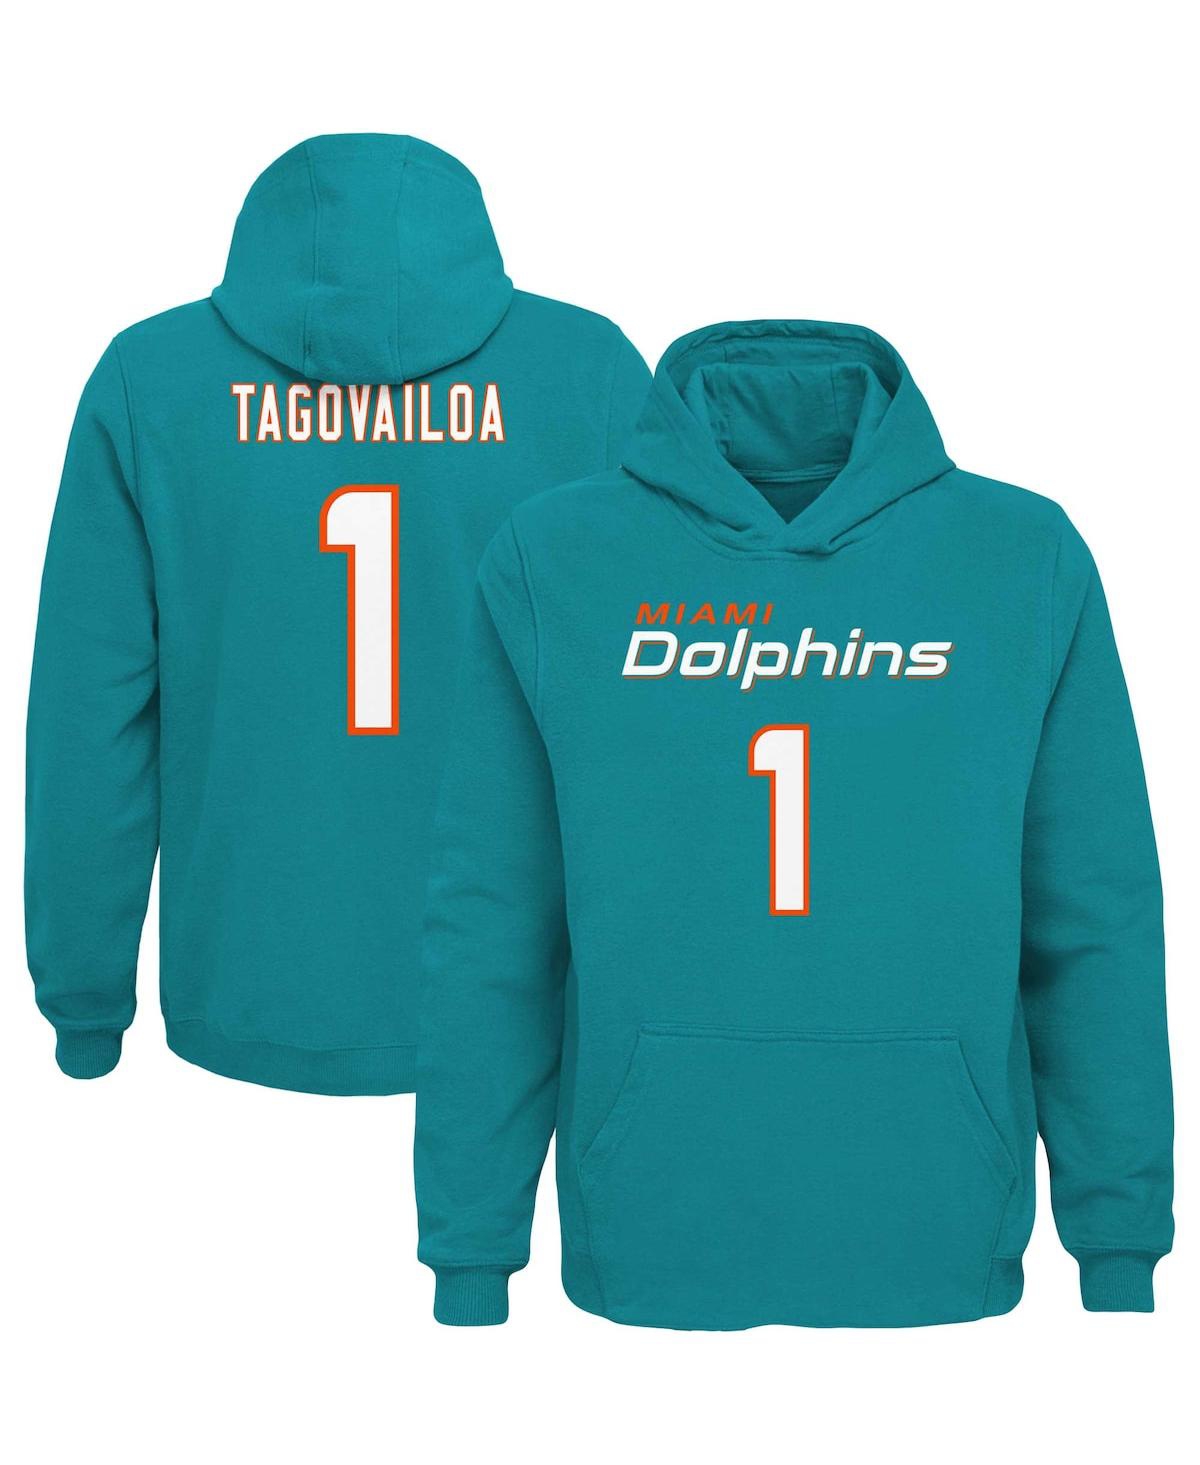 Outerstuff Kids' Big Boys Tua Tagovailoa Aqua Miami Dolphins Mainliner Player Name And Number Pullover Hoodie